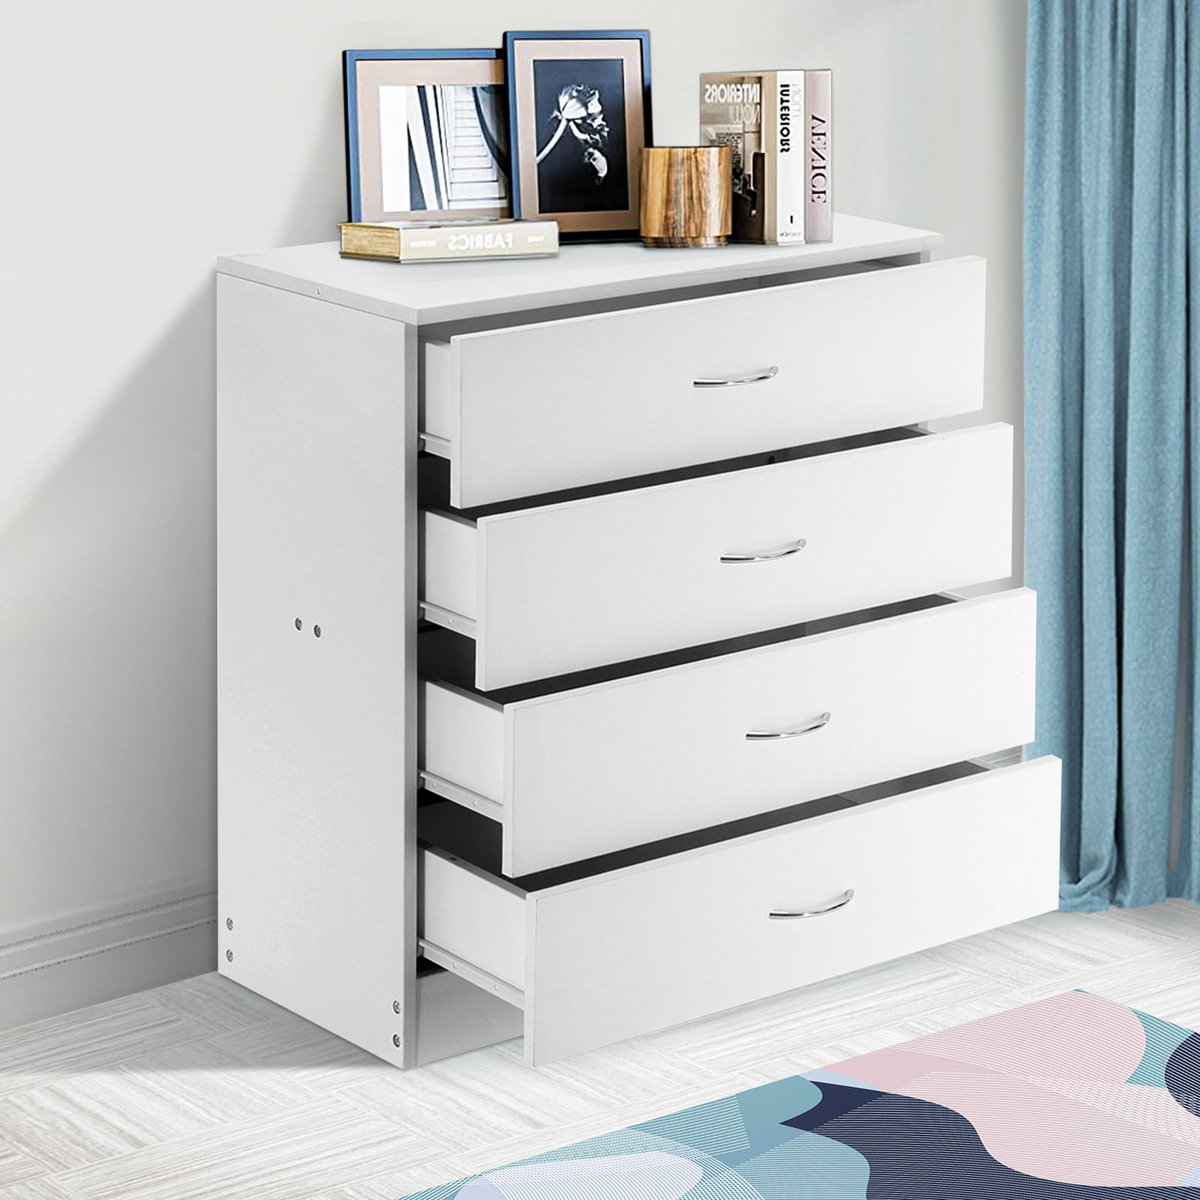 Check out the full details of the White 4-Drawer Dresser for Bedroom or Storage  👉🏽👉🏽 thecomfortcorner.jbachbrands.com/products/white…

#homefurniture #furniture #homedecor #interiordesign #luxuryfurniture #homeofficefurniture #livingroomfurniture #diningroomfurniture #bedroomfurniture #classicfurniture